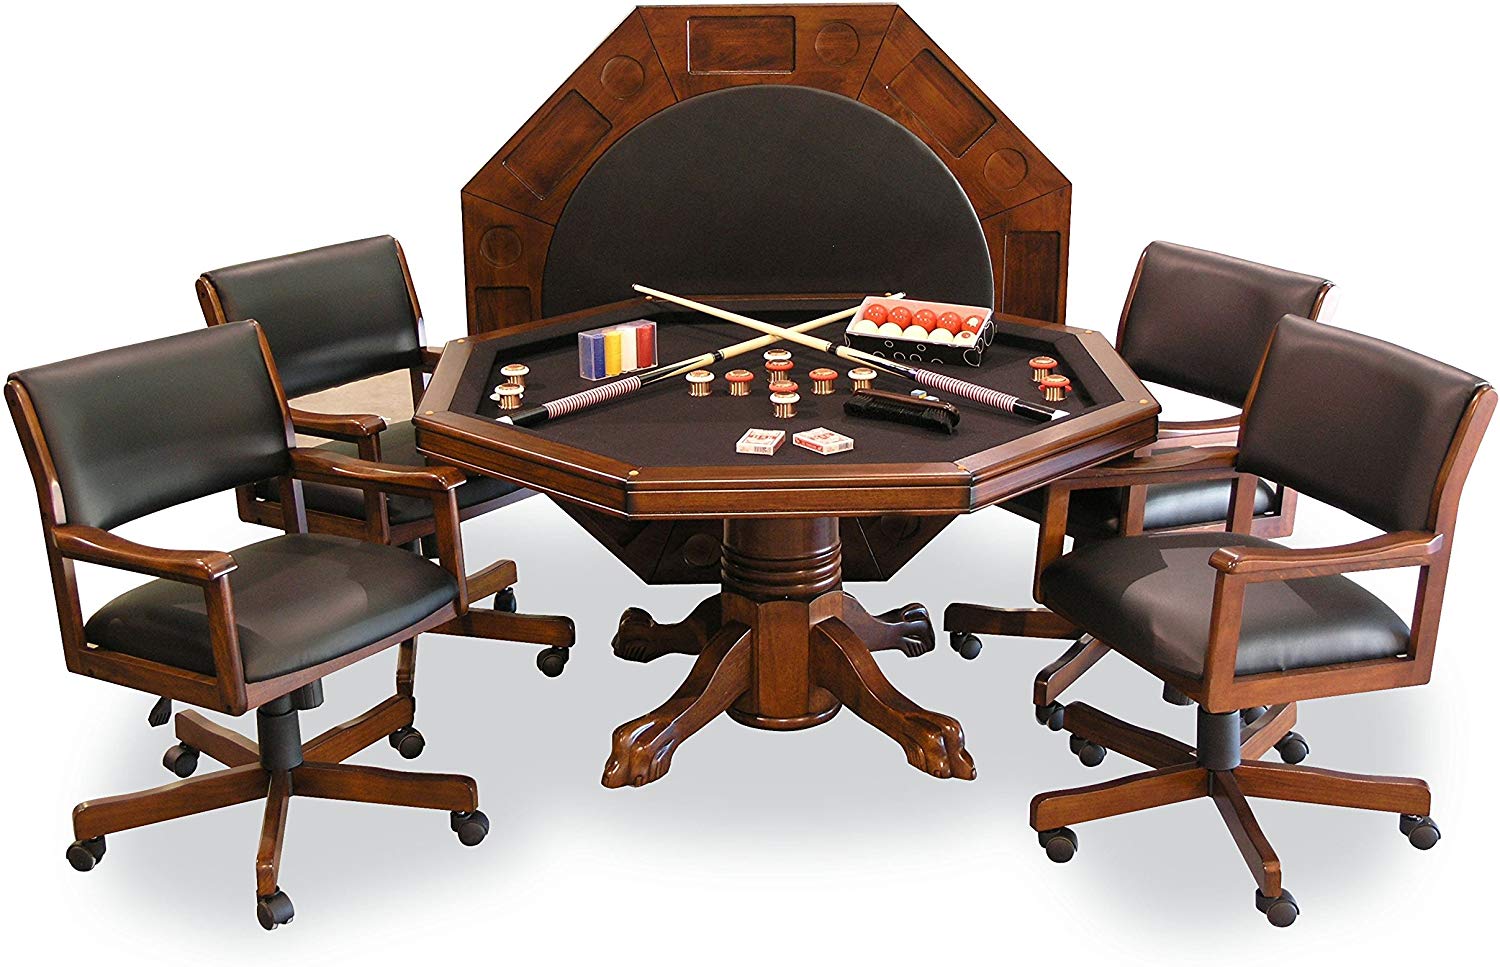 Fairview Game Rooms Combination Game & Dining Table Set